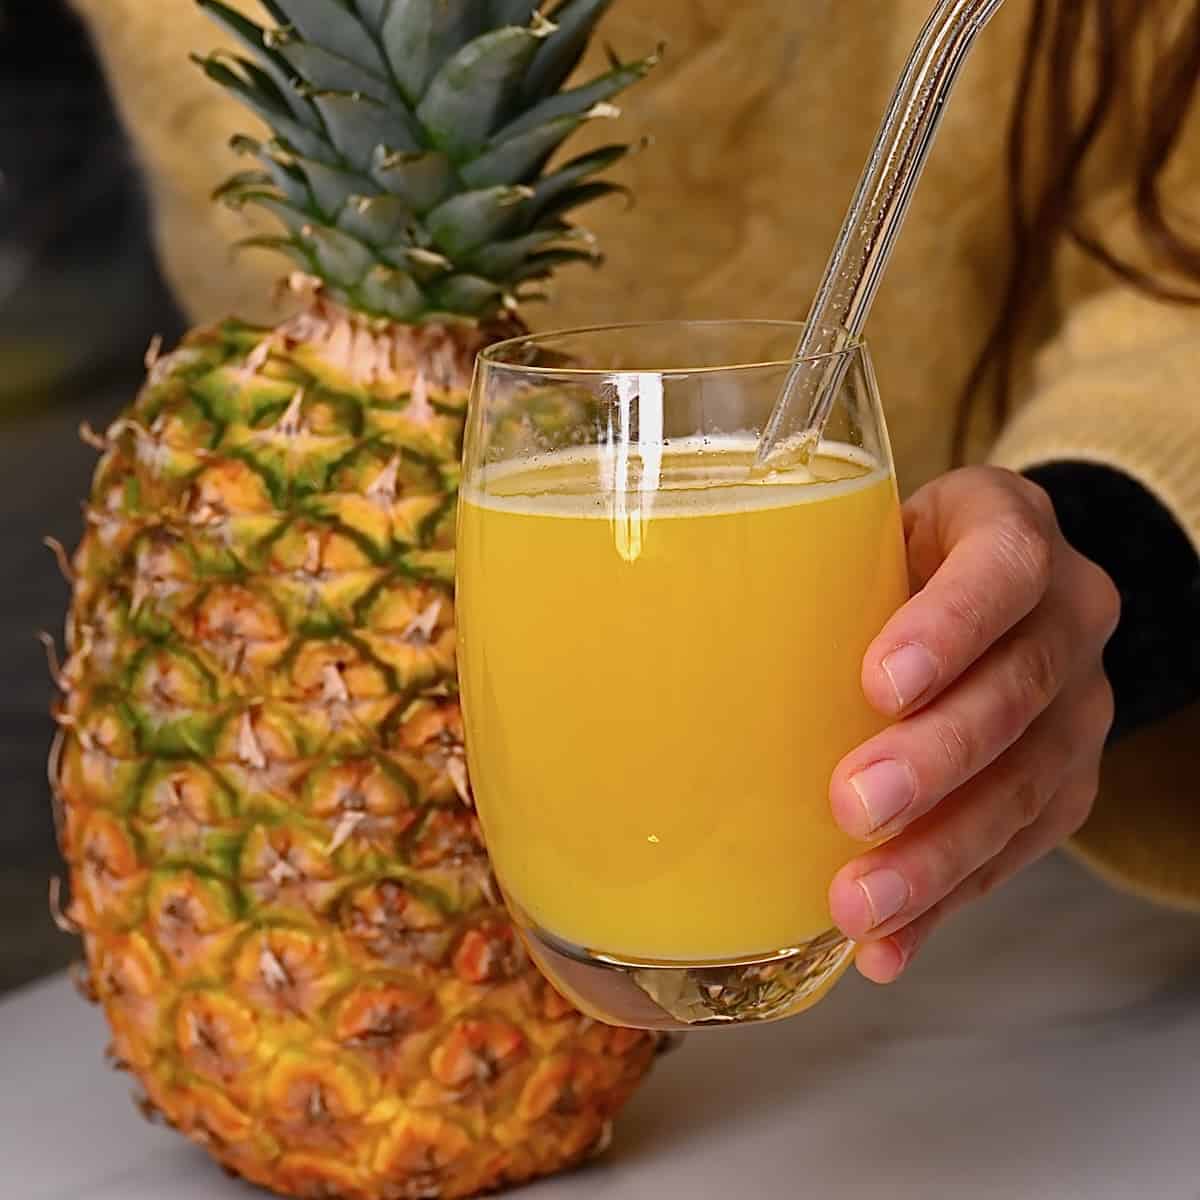 Pineapple juice in a glass and a pineapple